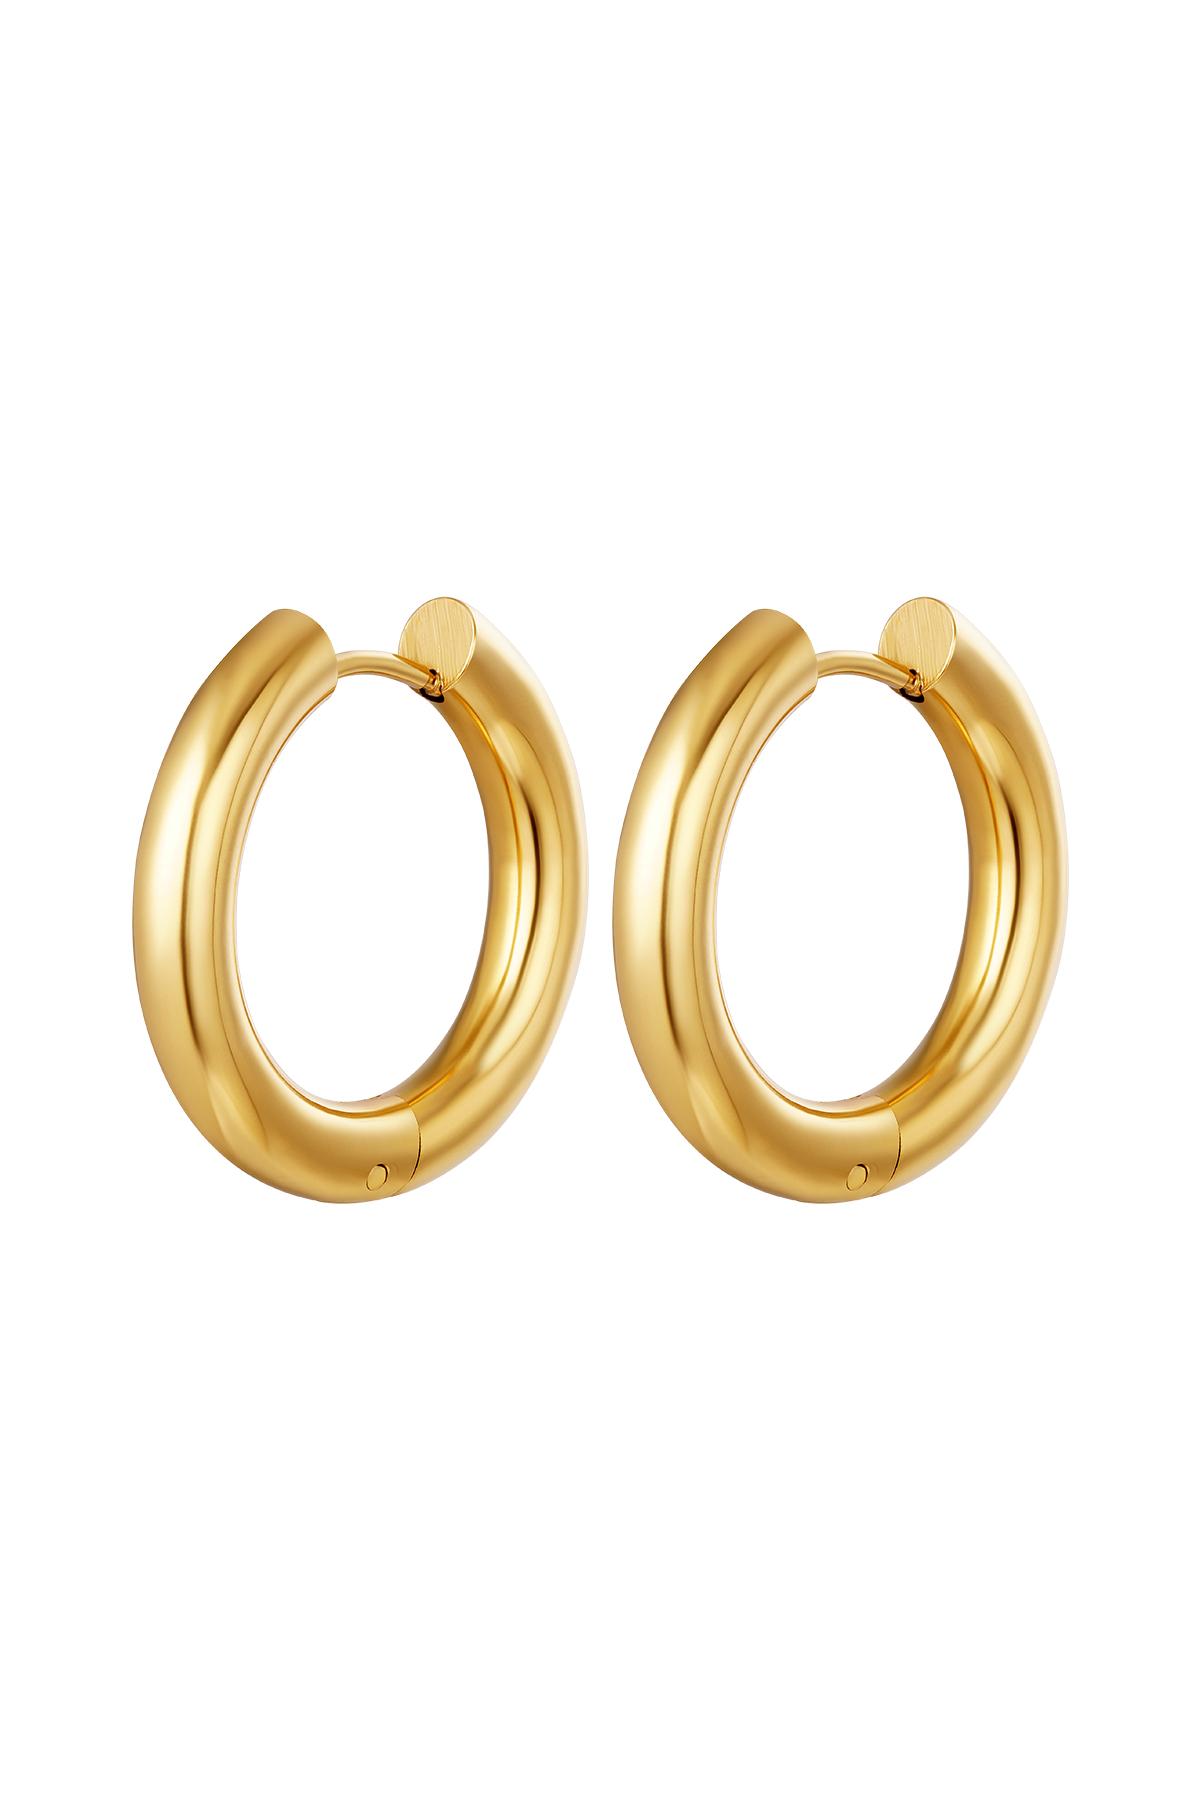 Basic creoles earrings - large Gold Stainless Steel h5 